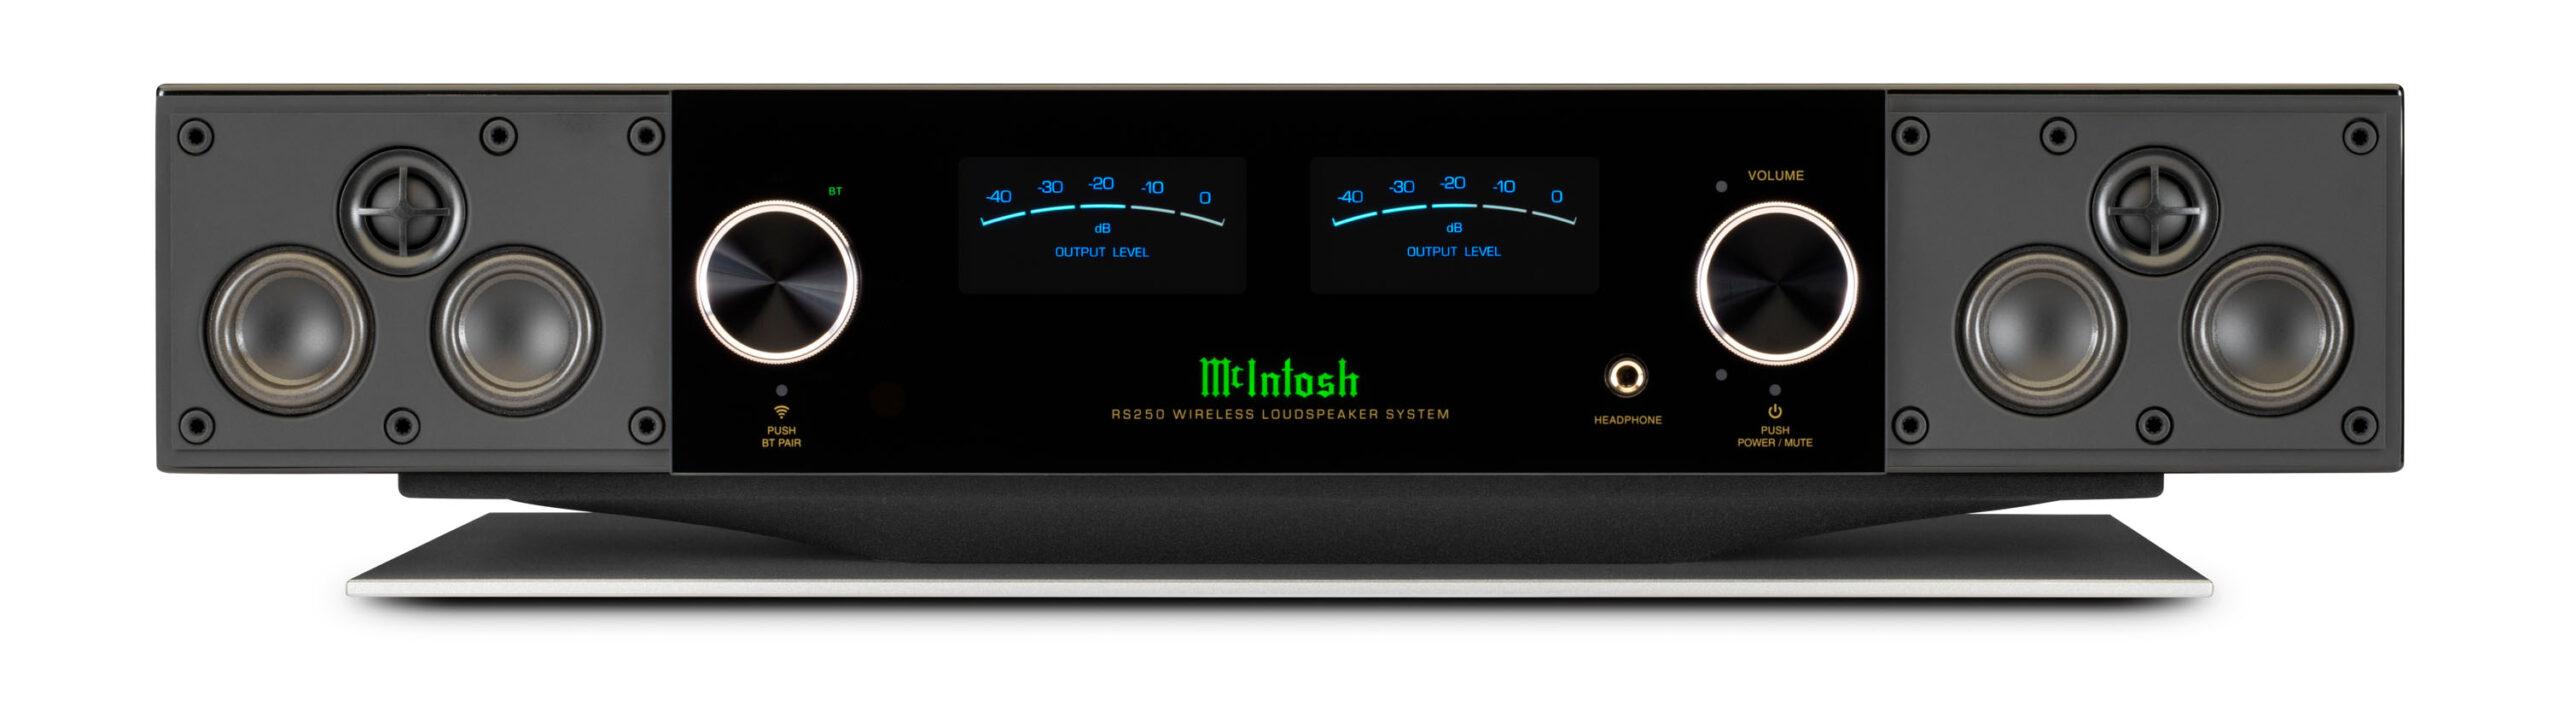 Two wireless speakers, the RS150 and RS250, offer streaming convenience with unmistakable McIntosh style, quality & performance. McIntosh e113a6d2 rs250 front no grilles hi res scaled